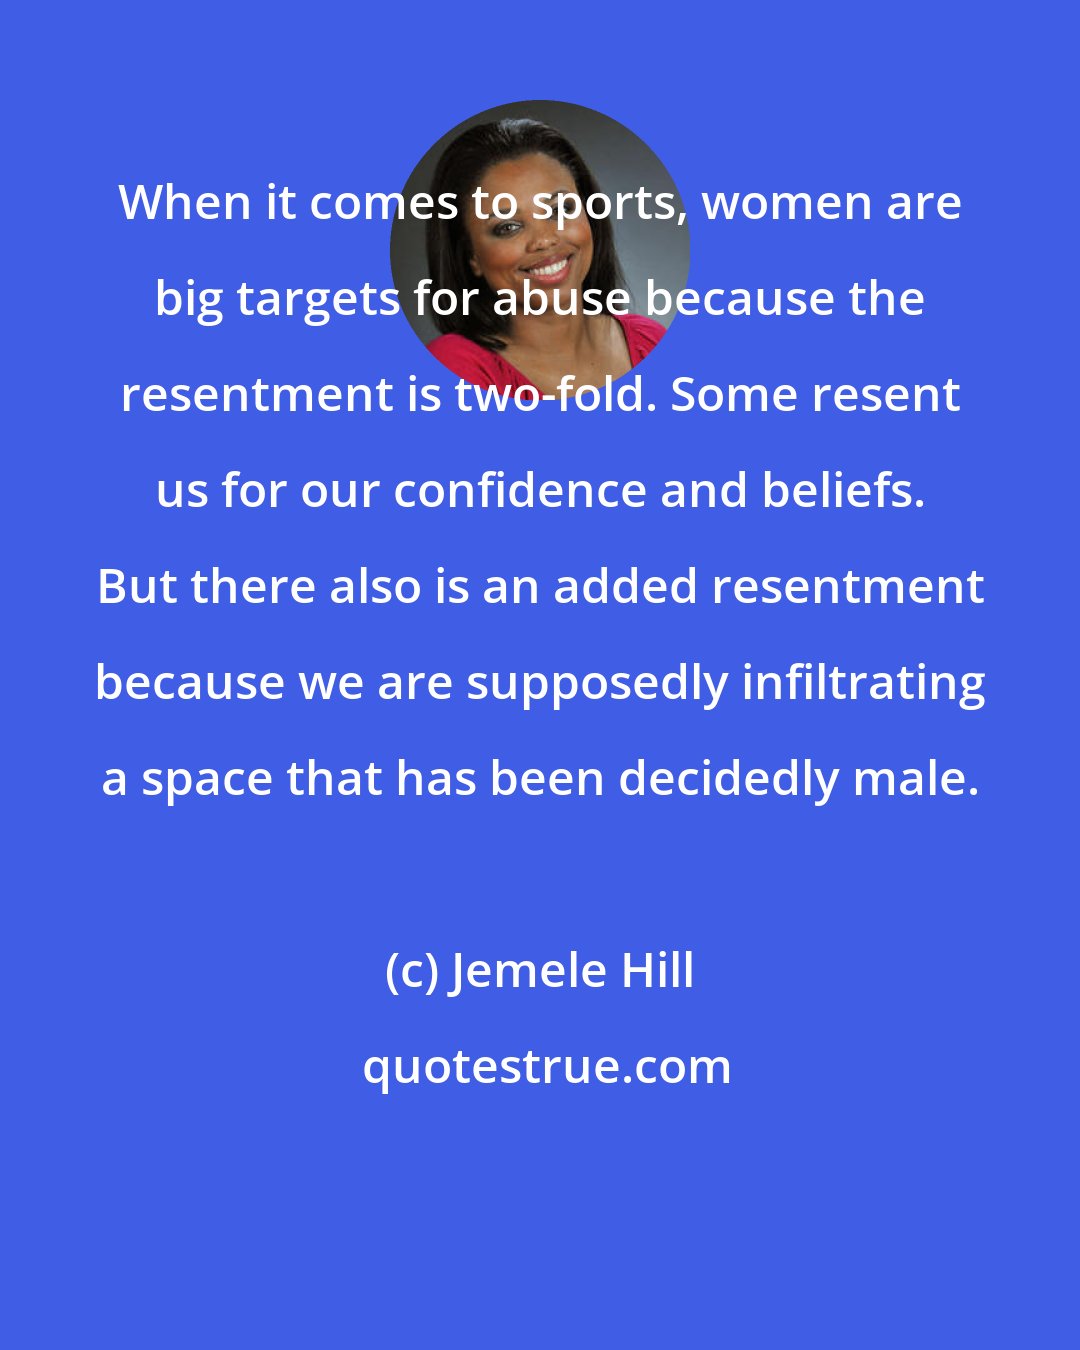 Jemele Hill: When it comes to sports, women are big targets for abuse because the resentment is two-fold. Some resent us for our confidence and beliefs. But there also is an added resentment because we are supposedly infiltrating a space that has been decidedly male.